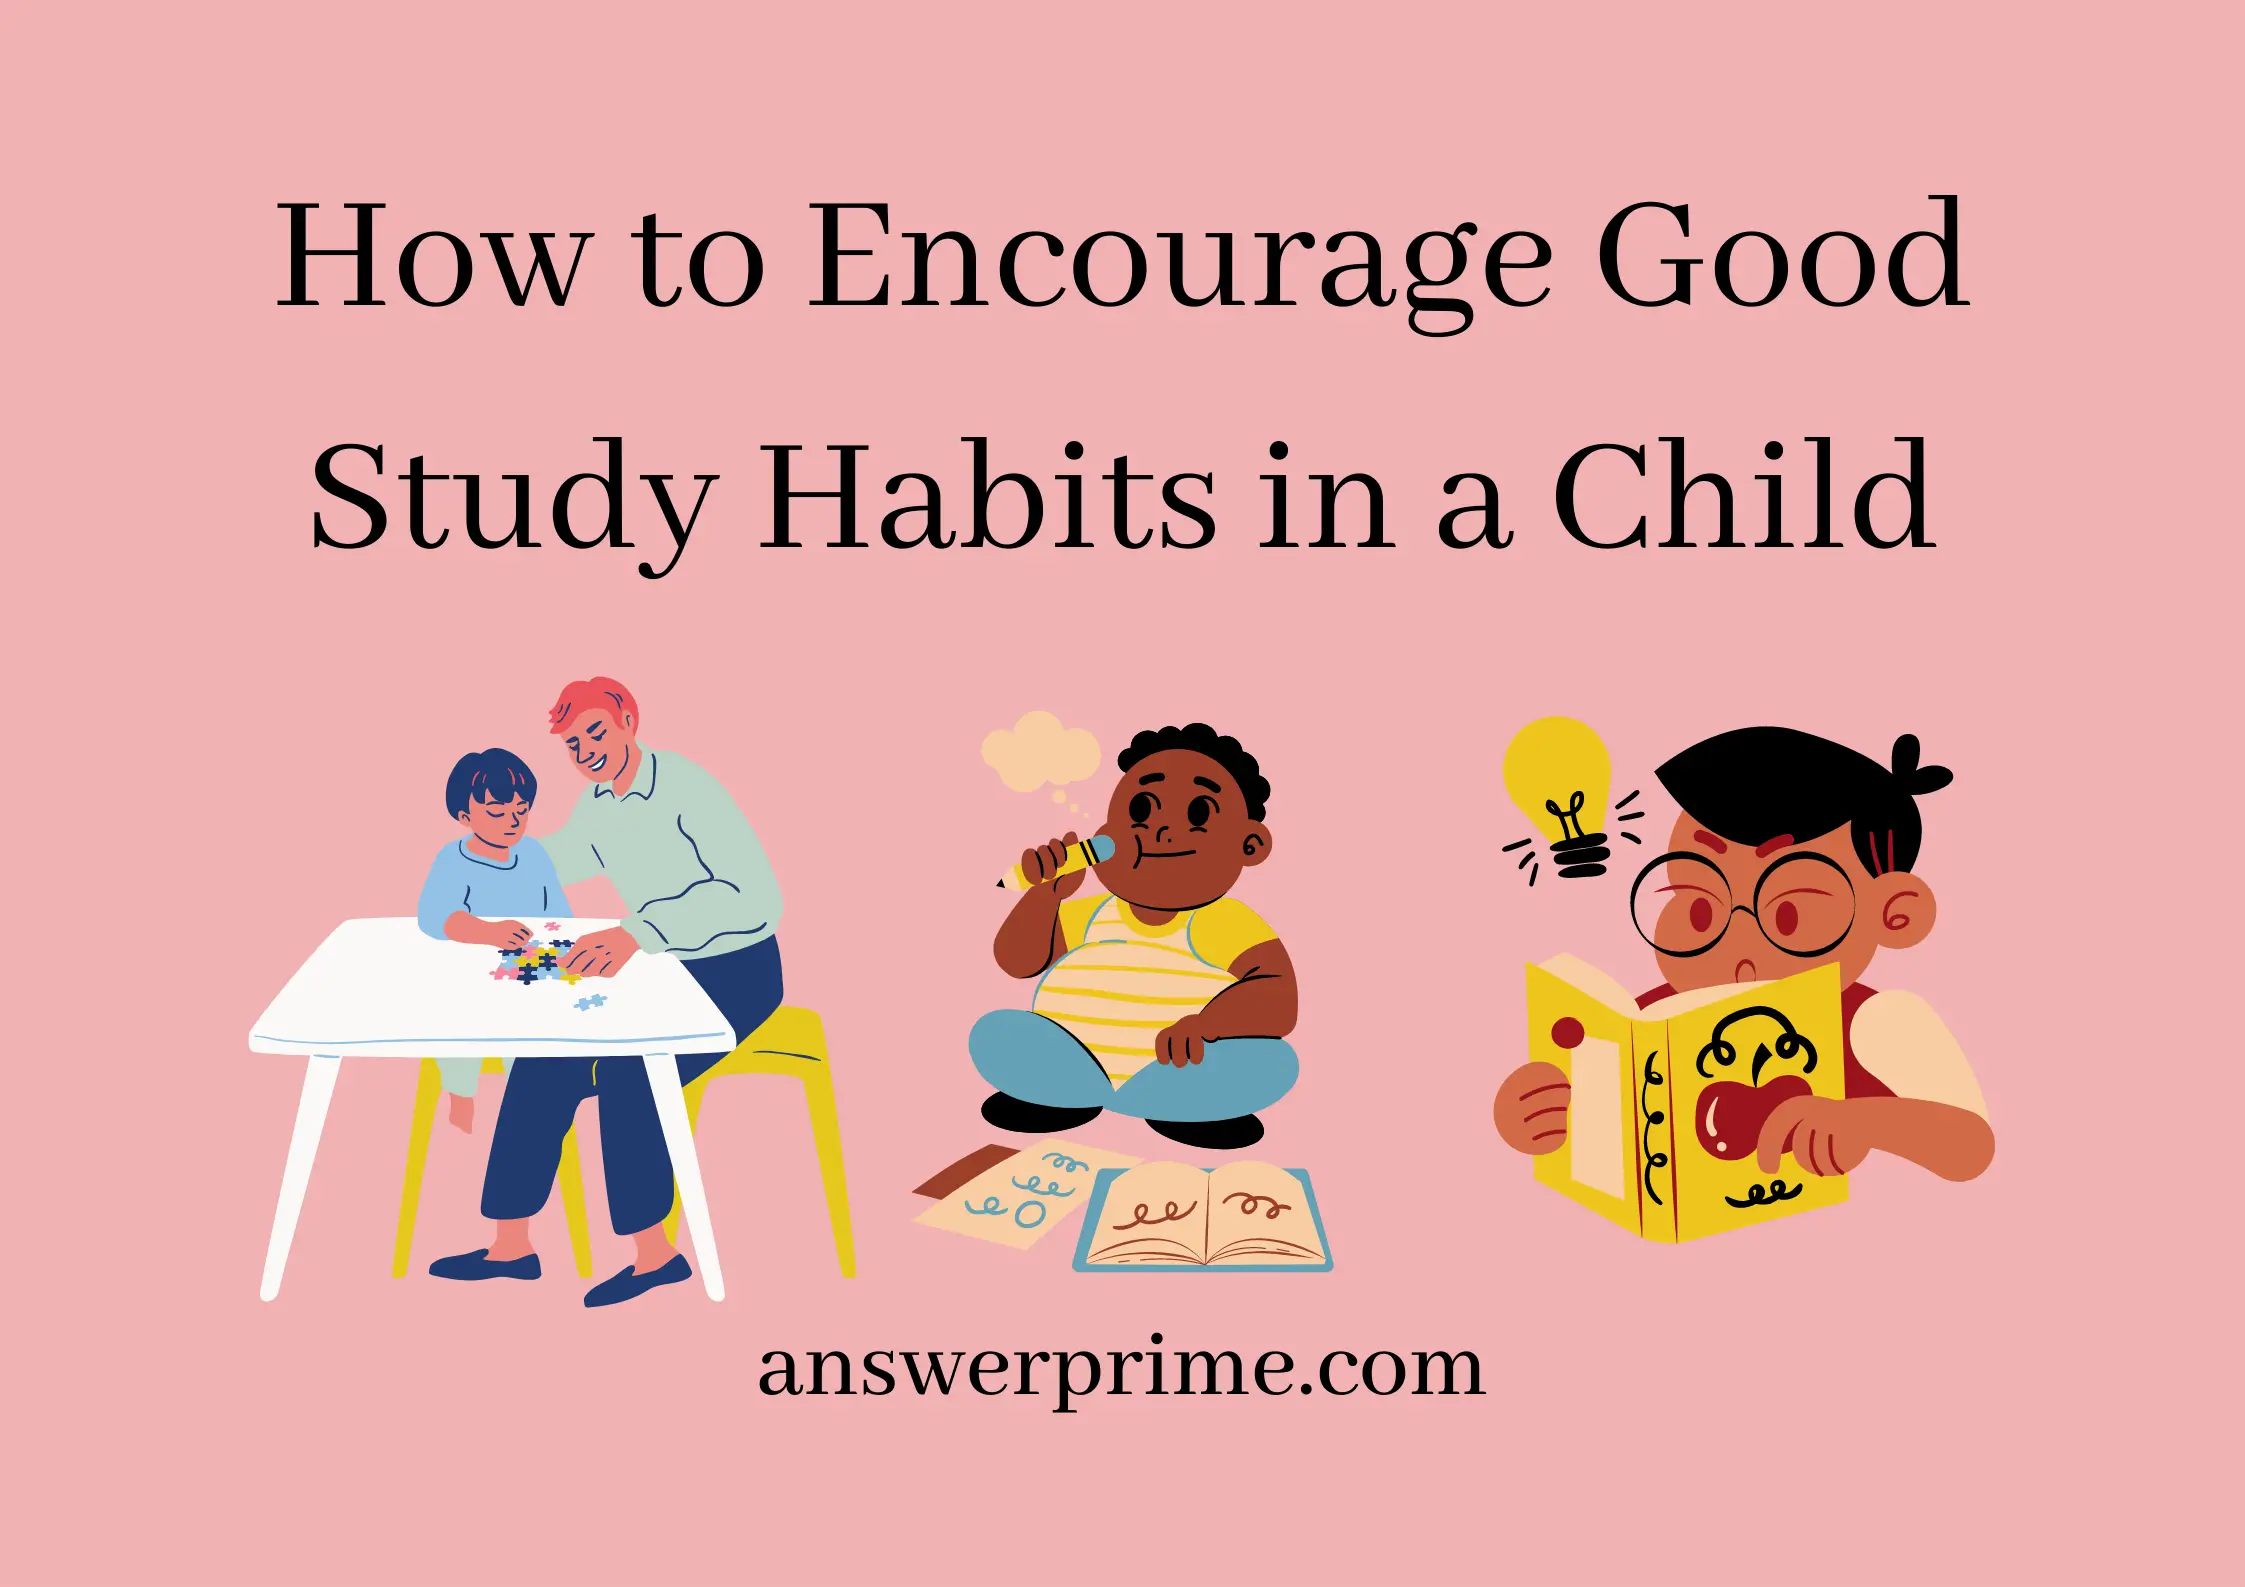 How tha fuck ta Encourage Dope Study Habits up in a Child